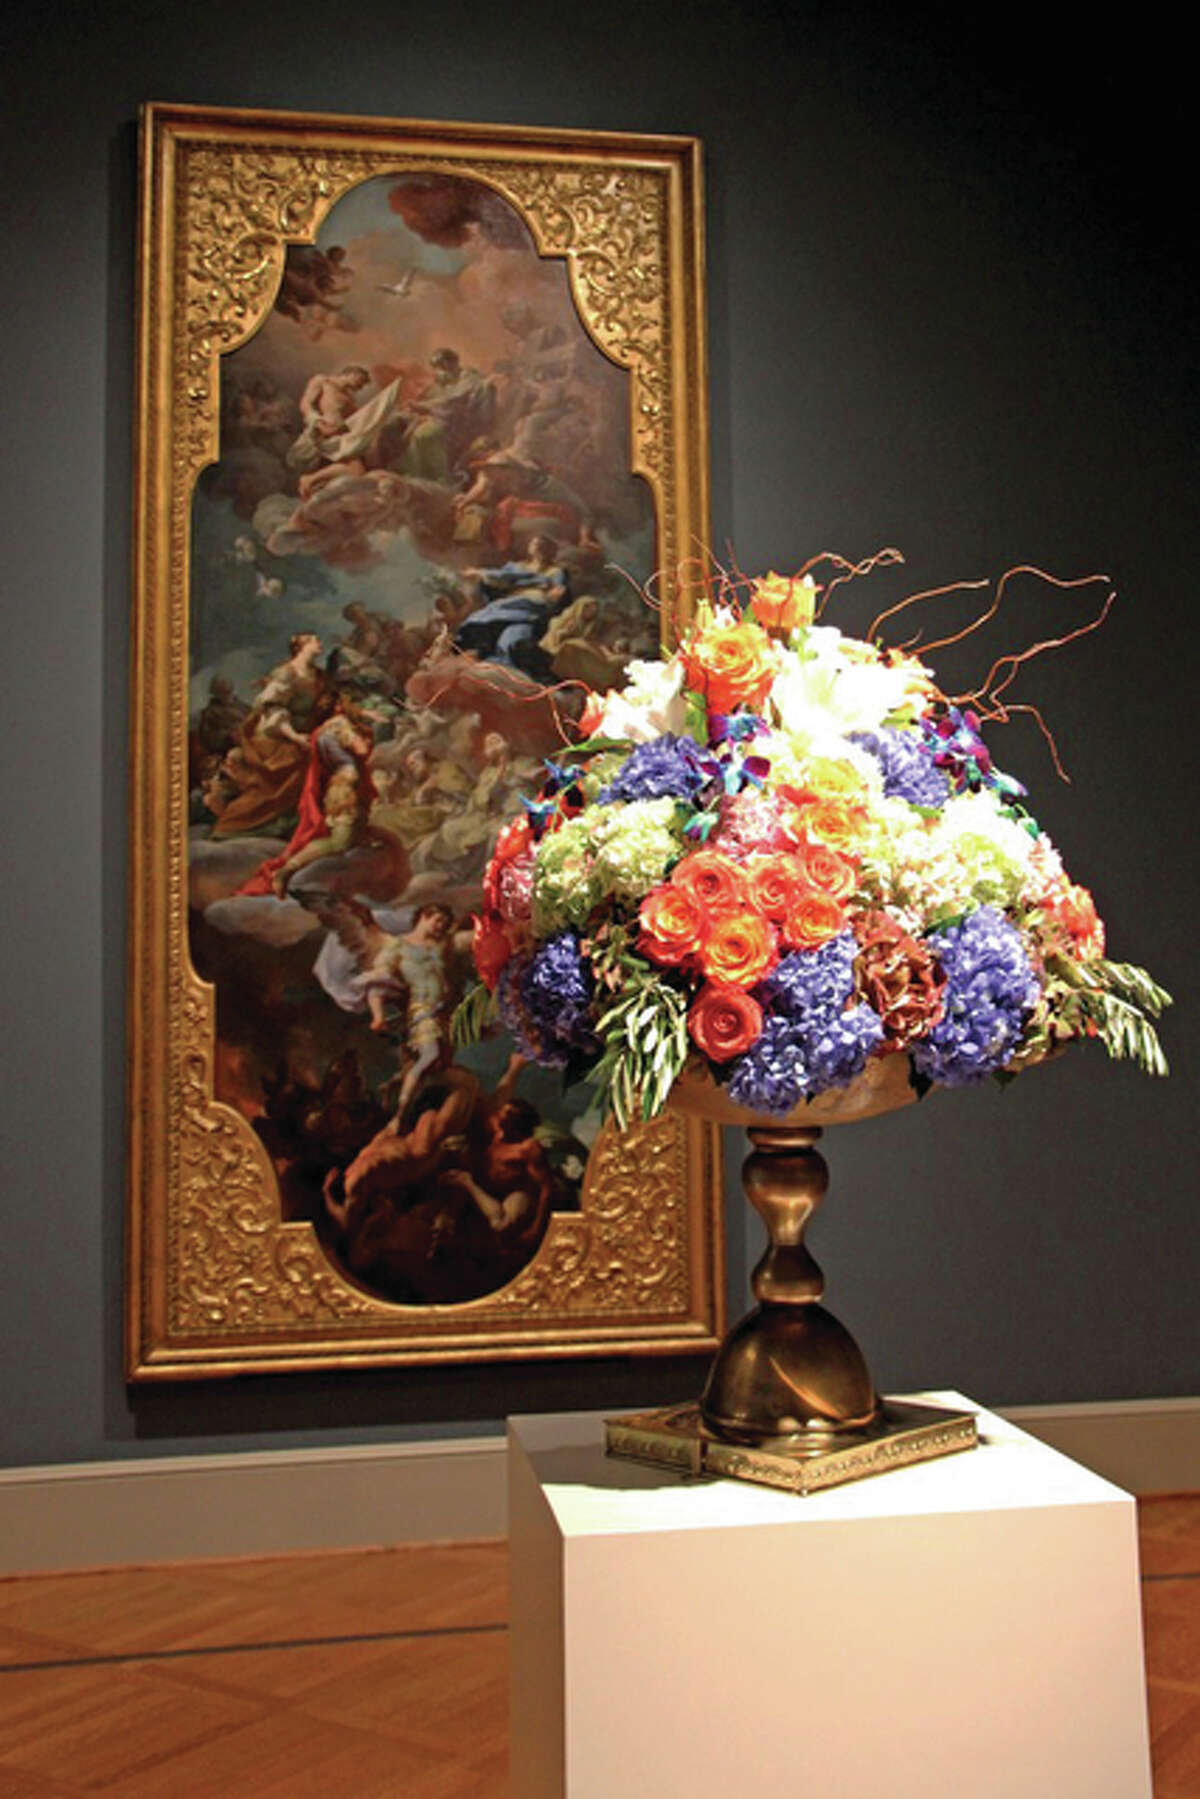 From last year's Art in Bloom, St. Helena and the Emperor Constantine Presented to the Holy Trinity by the Virgin Mary; Jeana Reisinger, Garden Club of St Louis; 2015 Judge’s Choice: 2015 Best Traditional Design, 2015 Staff Choice: Best Traditional Design, 2015 People’s Choice: Best Traditional Design Saint Louis Art Museum | For The Telegraph